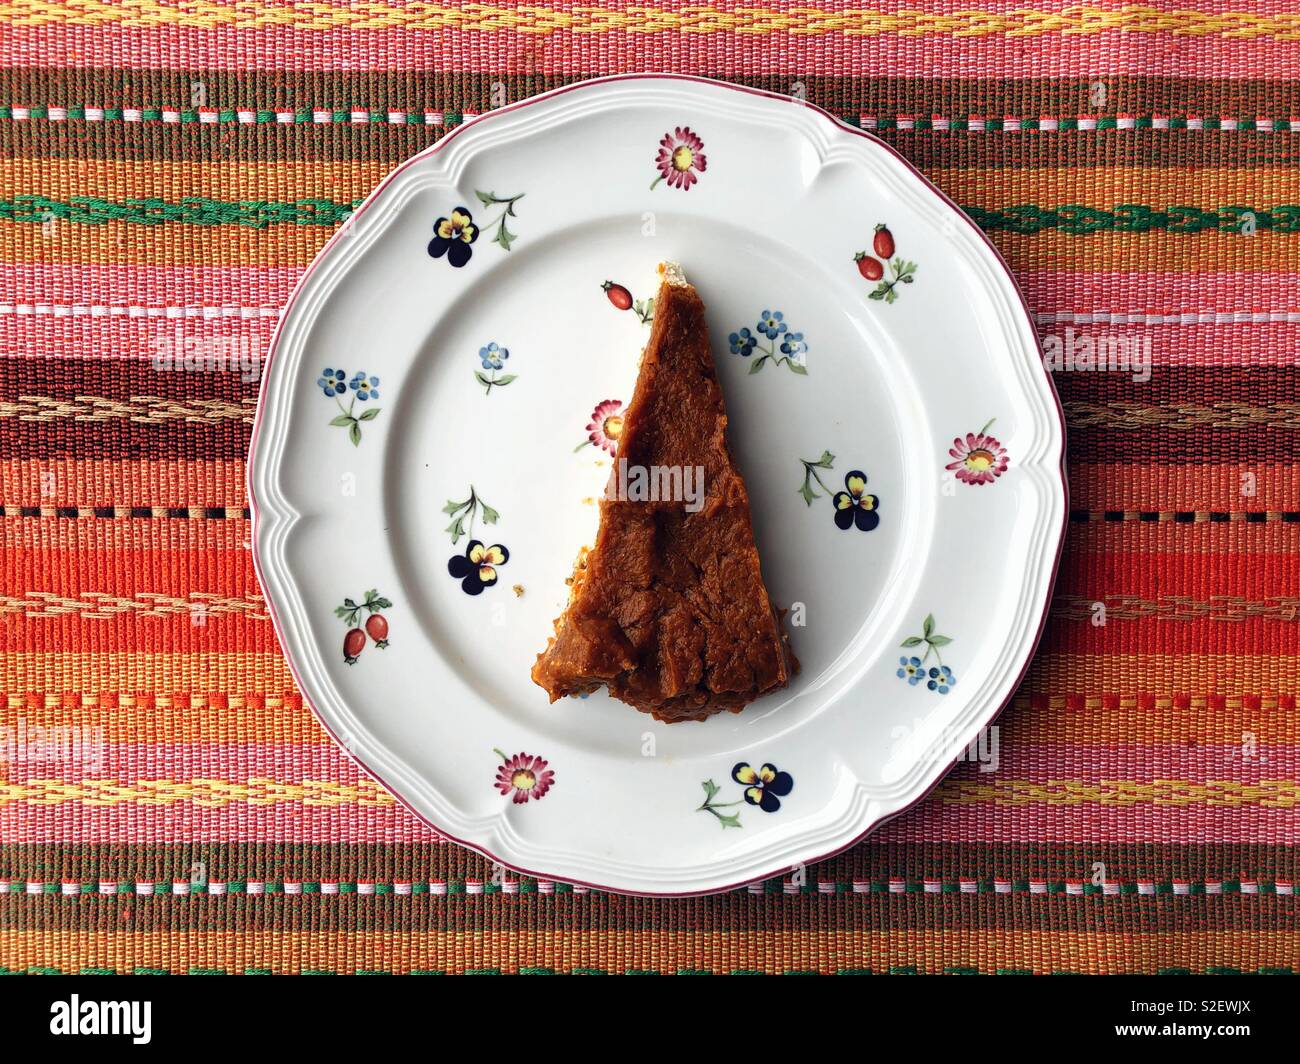 Vegan pumpkin cheesecake on cute plate and stripy woven placemat for Thanksgiving dinner Stock Photo